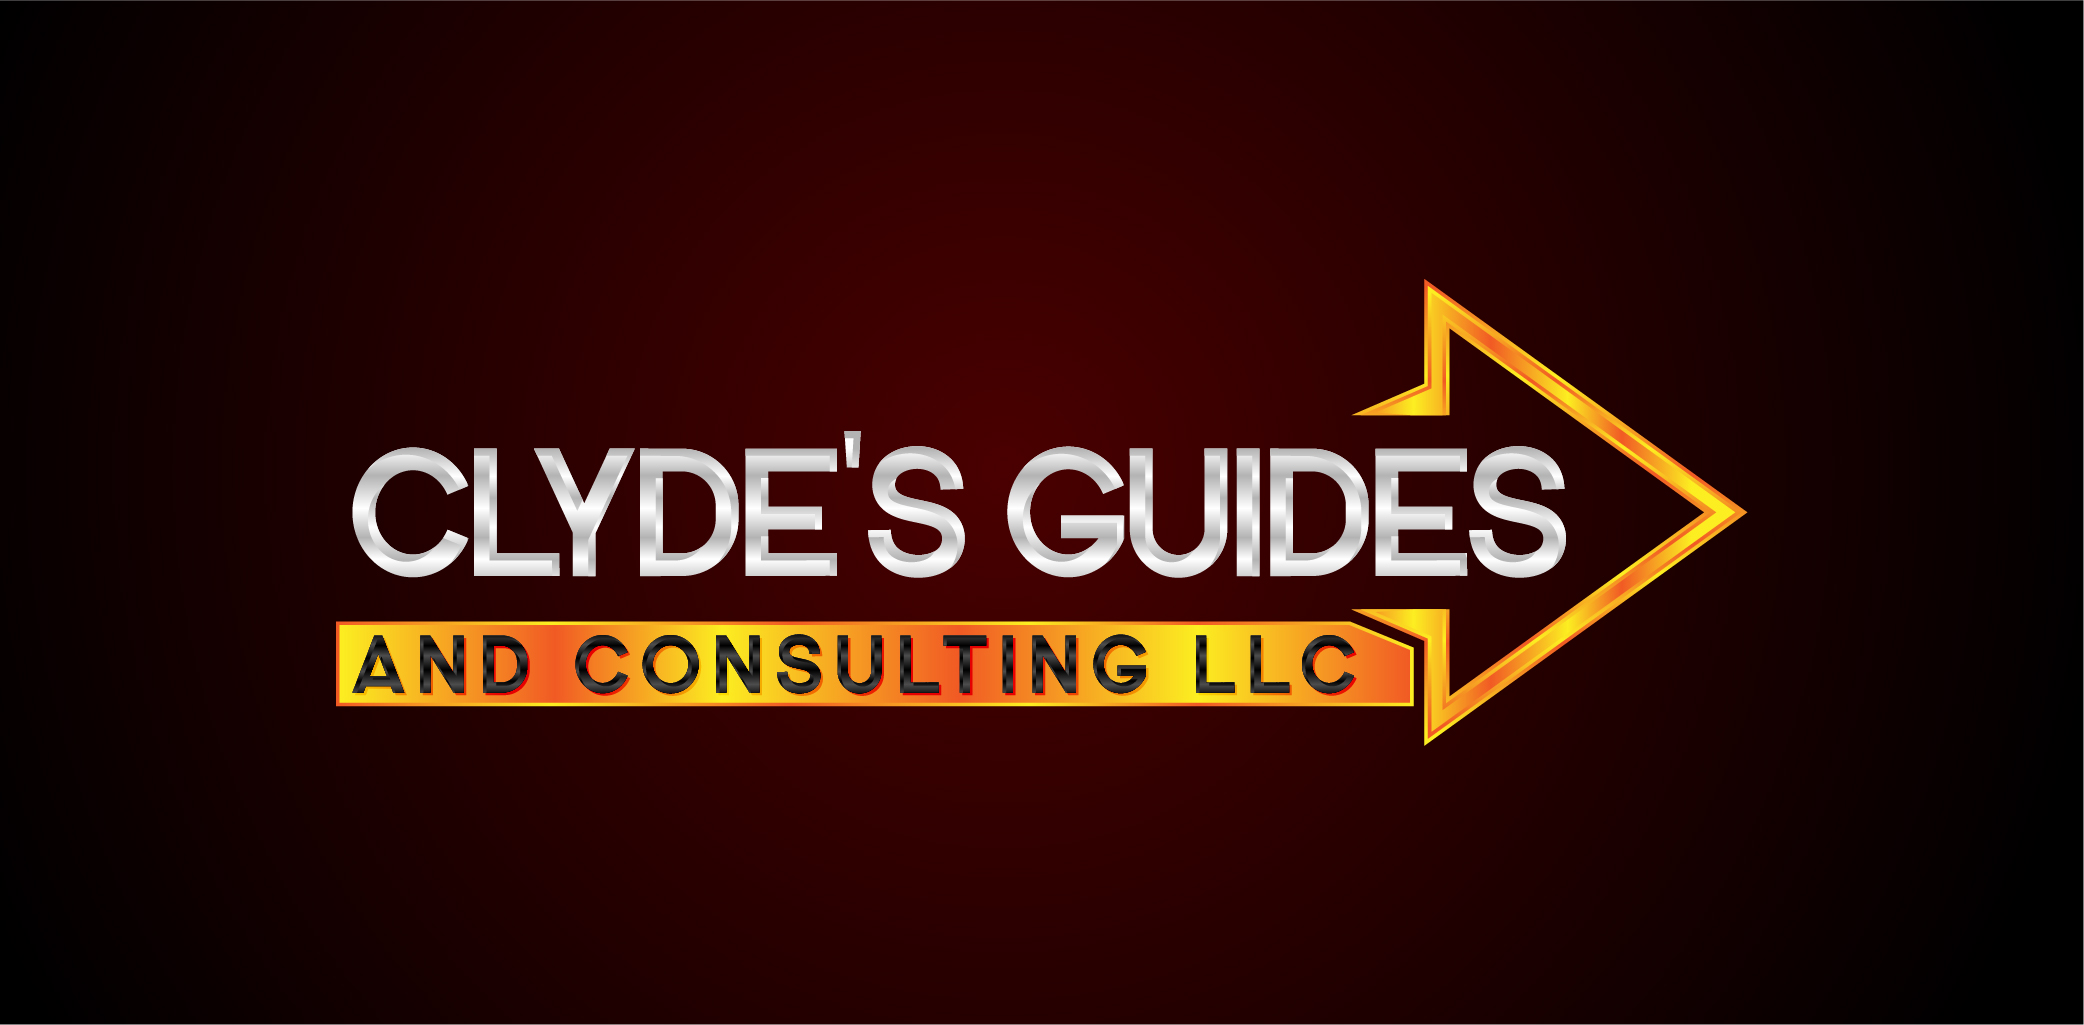 Clyde’s Guides and Consulting, LLC